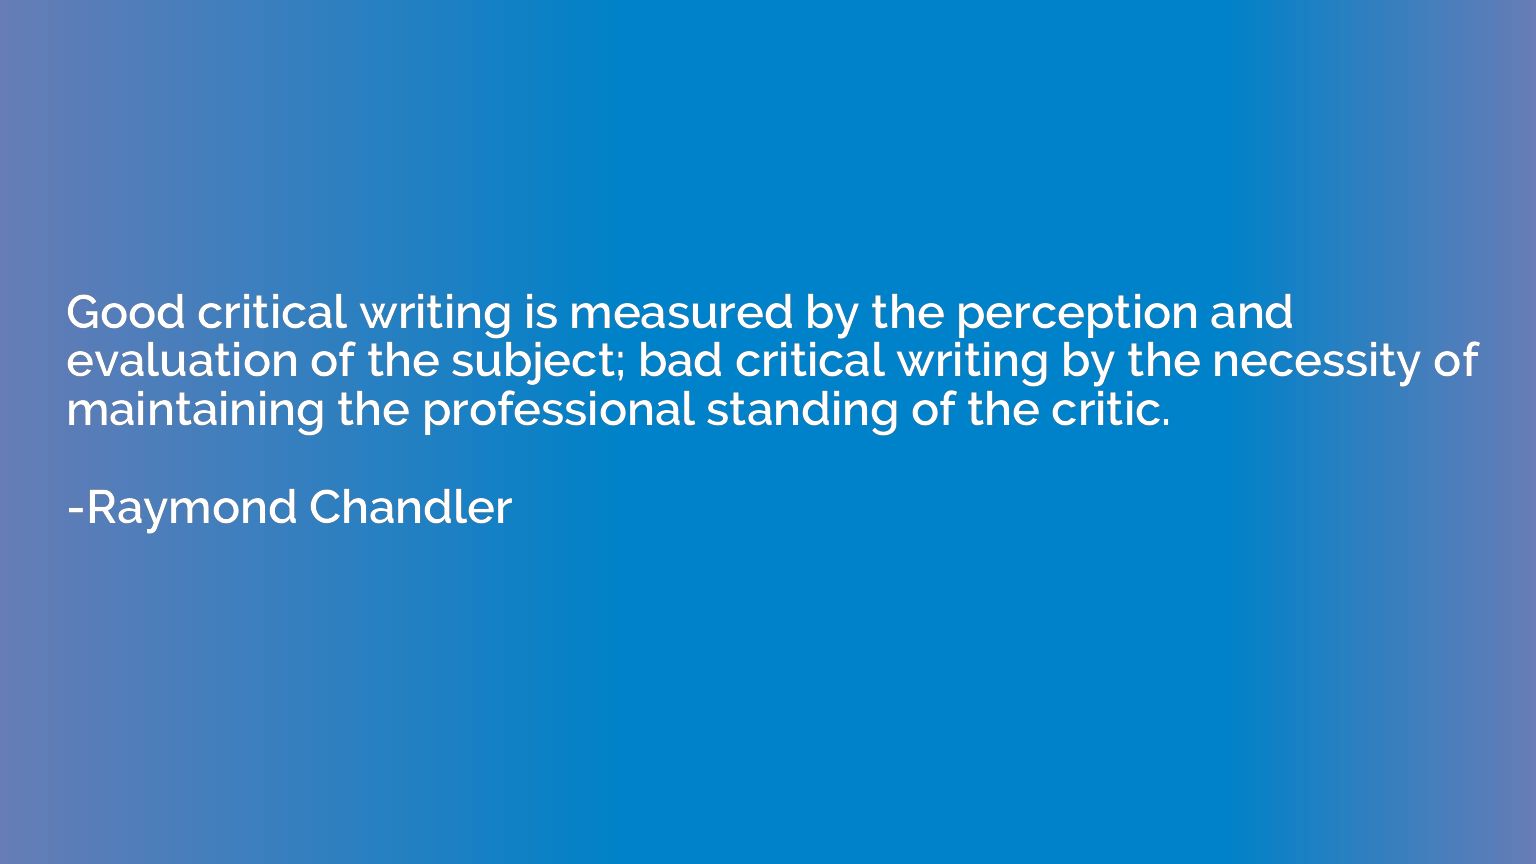 Good critical writing is measured by the perception and eval